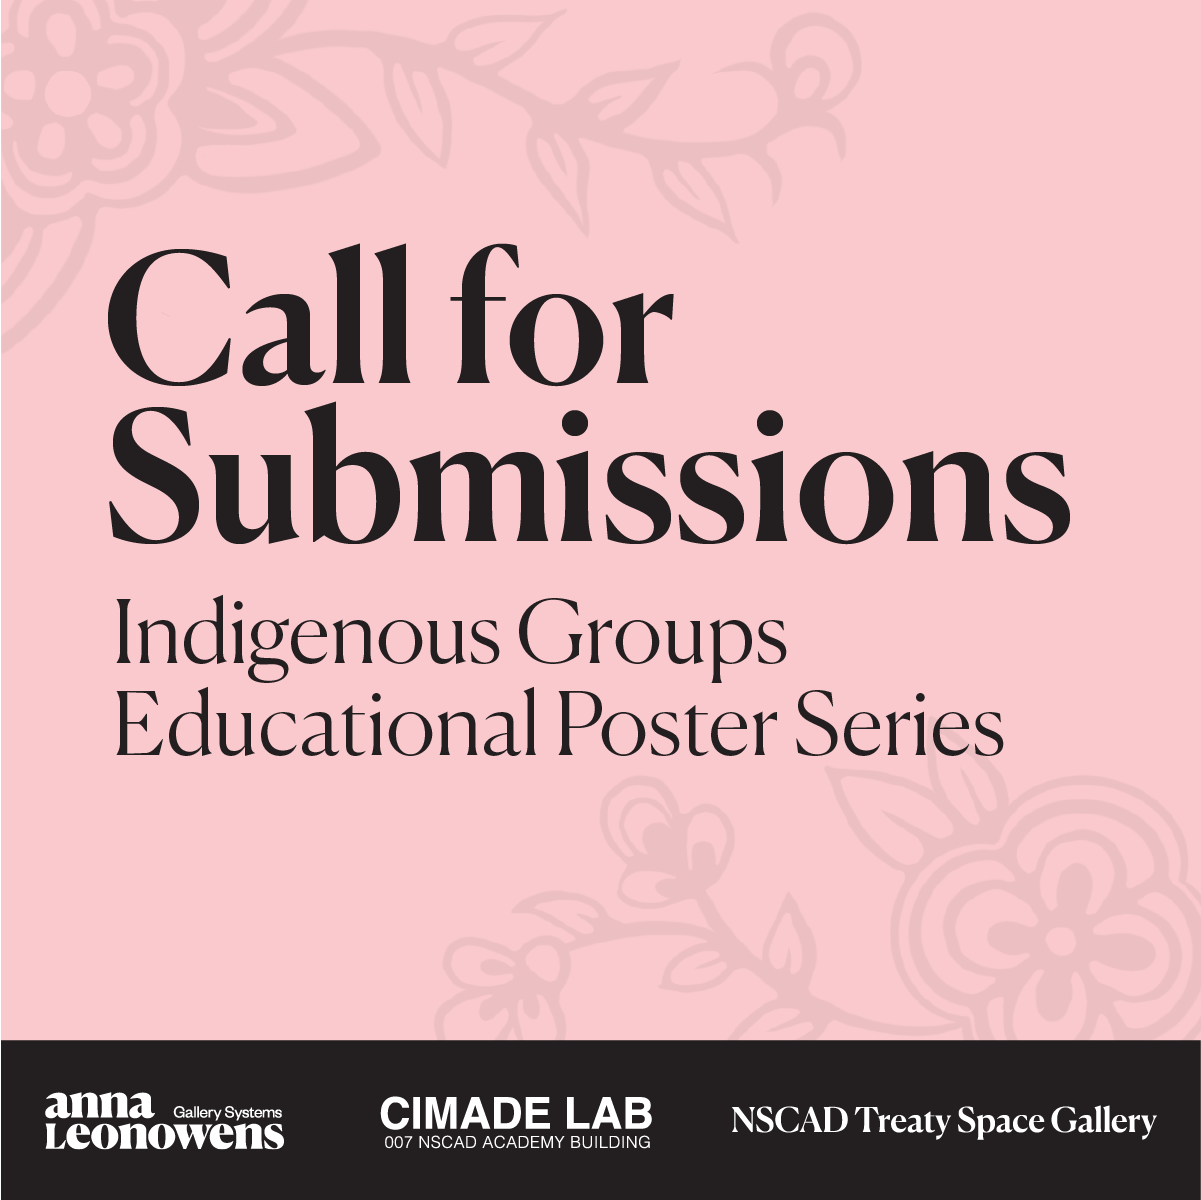 Black text on a pink background that reads: Call for Submissions, Indigenous Groups Educational Poster Series. The Logos of Anna Leonowens Gallery Systems, CIMADE LAB and NSCAD Treaty Space Gallery are on the bottom